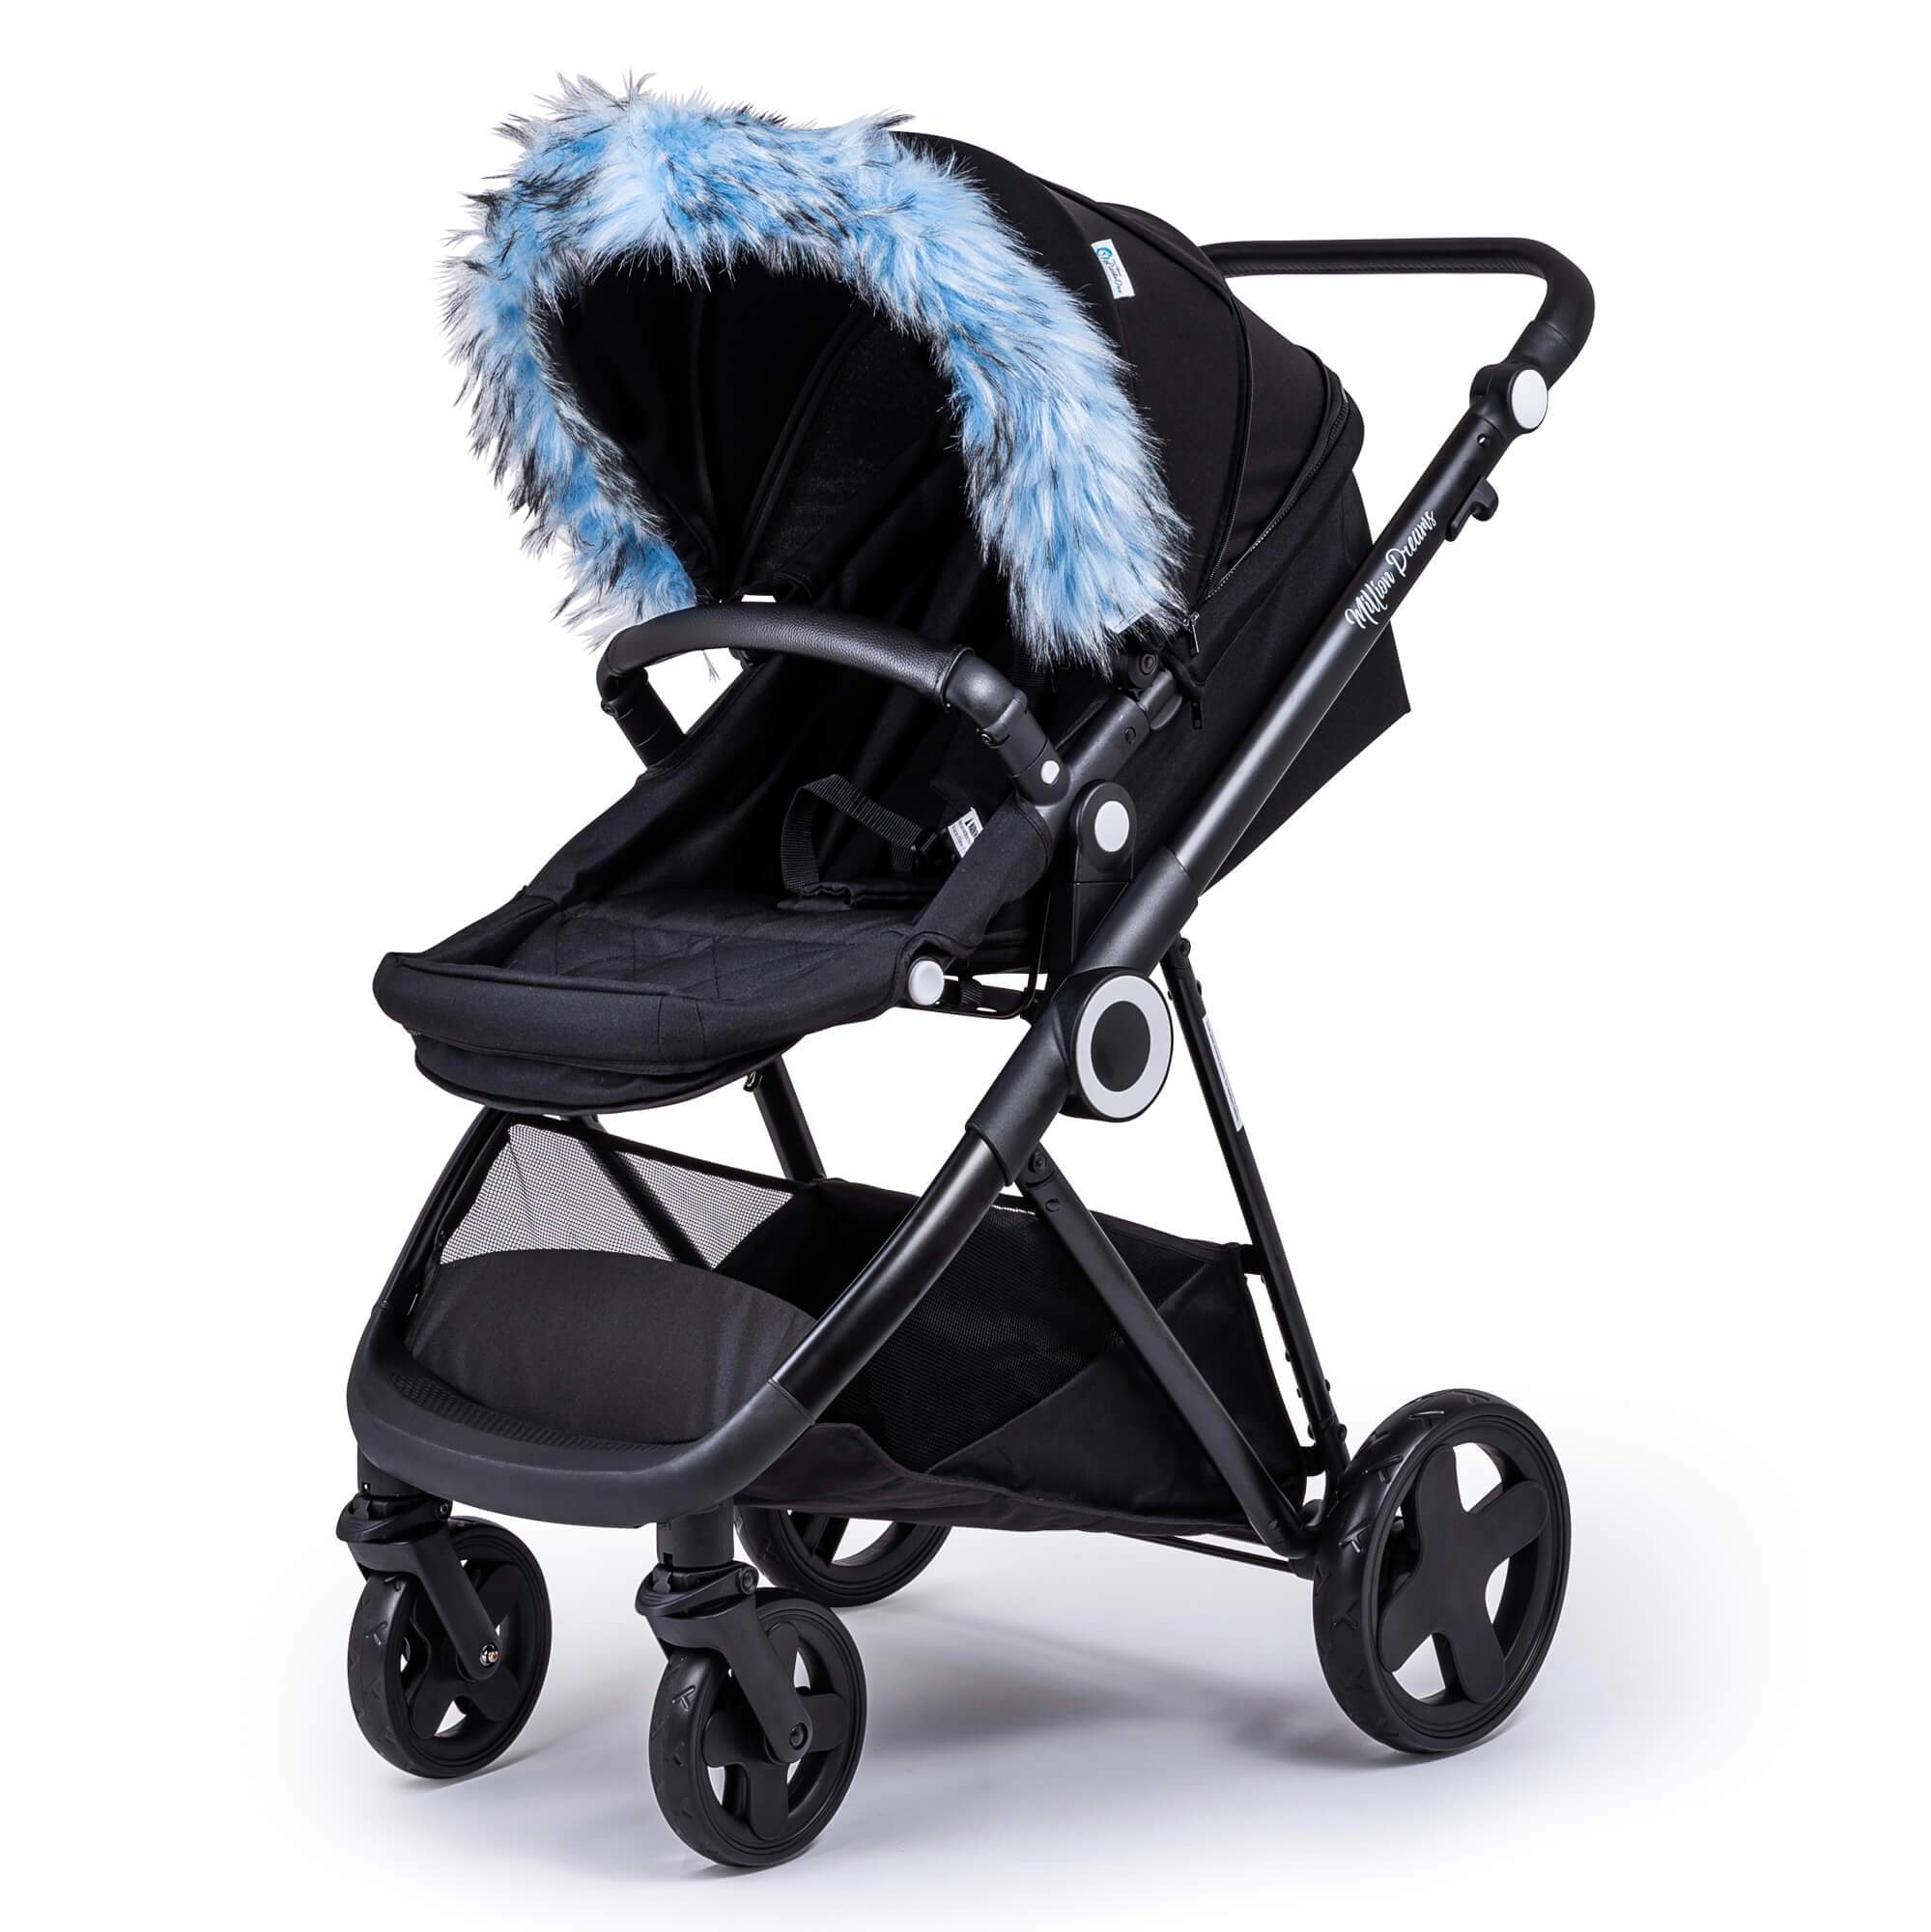 Pram Fur Hood Trim Attachment for Pushchair - Light Blue / Fits All Models | For Your Little One